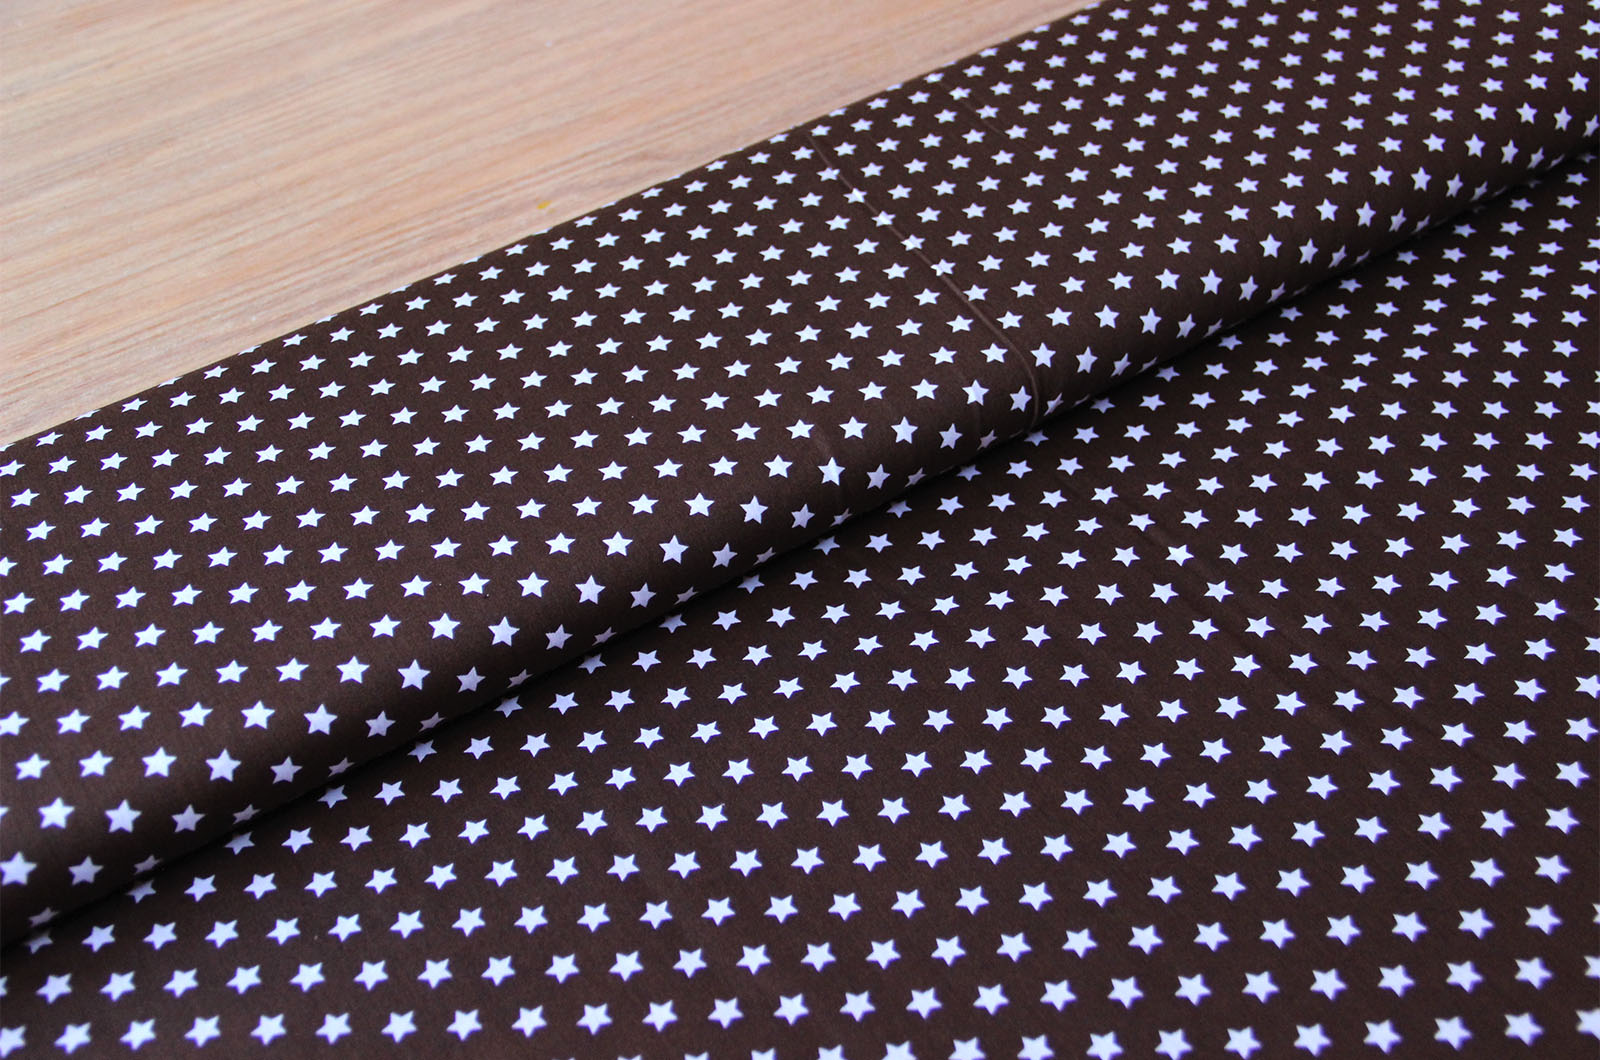 Buy 055-brown Cotton print stars 1cm * From 50cm